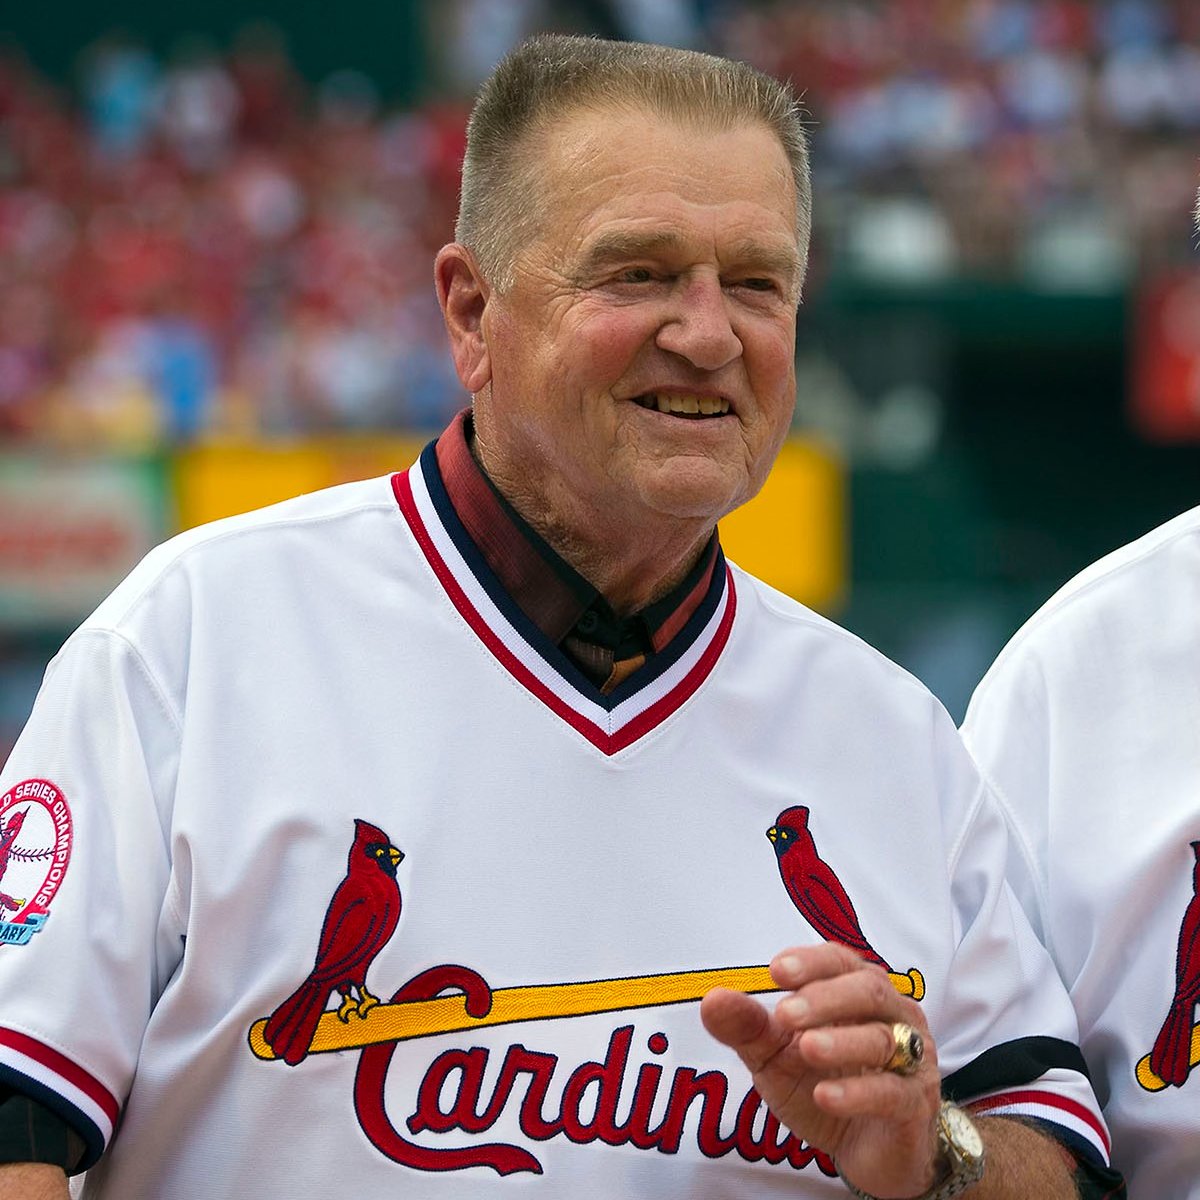 We join the @Cardinals in mourning the loss of former manager Whitey Herzog - no doubt a legend in this town. Our condolences go out to Herzog's family and friends, the Cardinals and everyone who knew him.